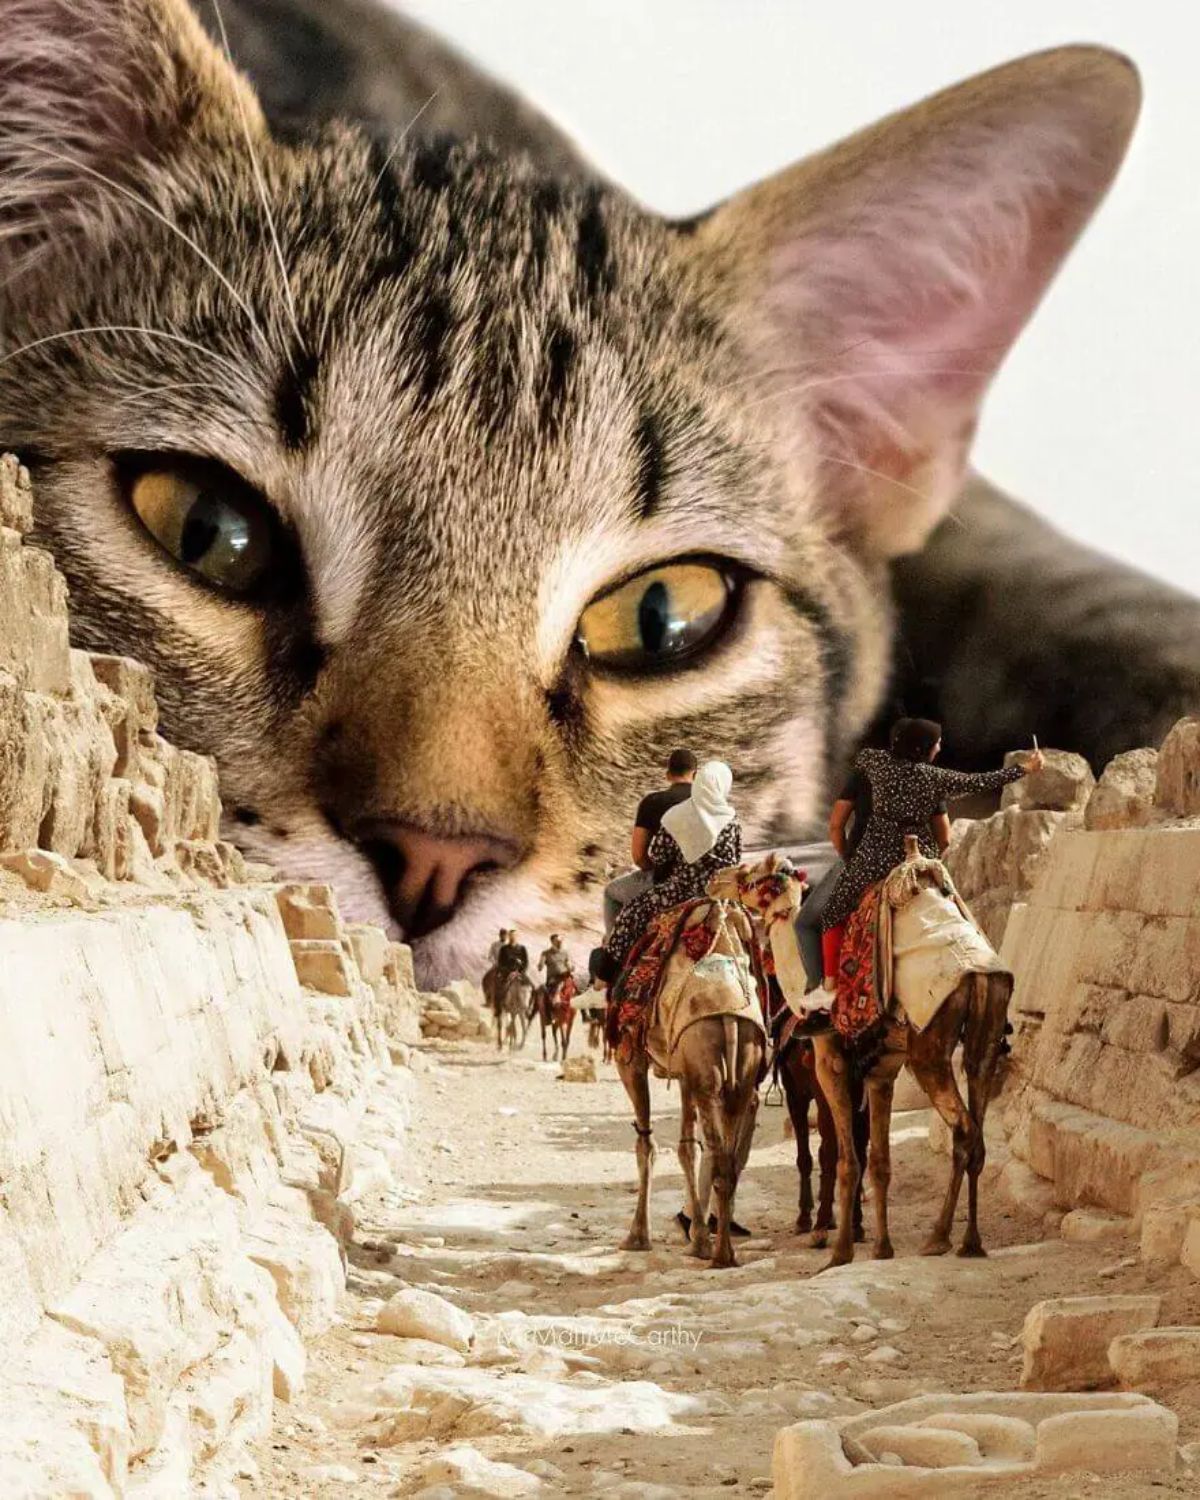 large photoshopped grey cat's head blocking the way in front of people on some camels